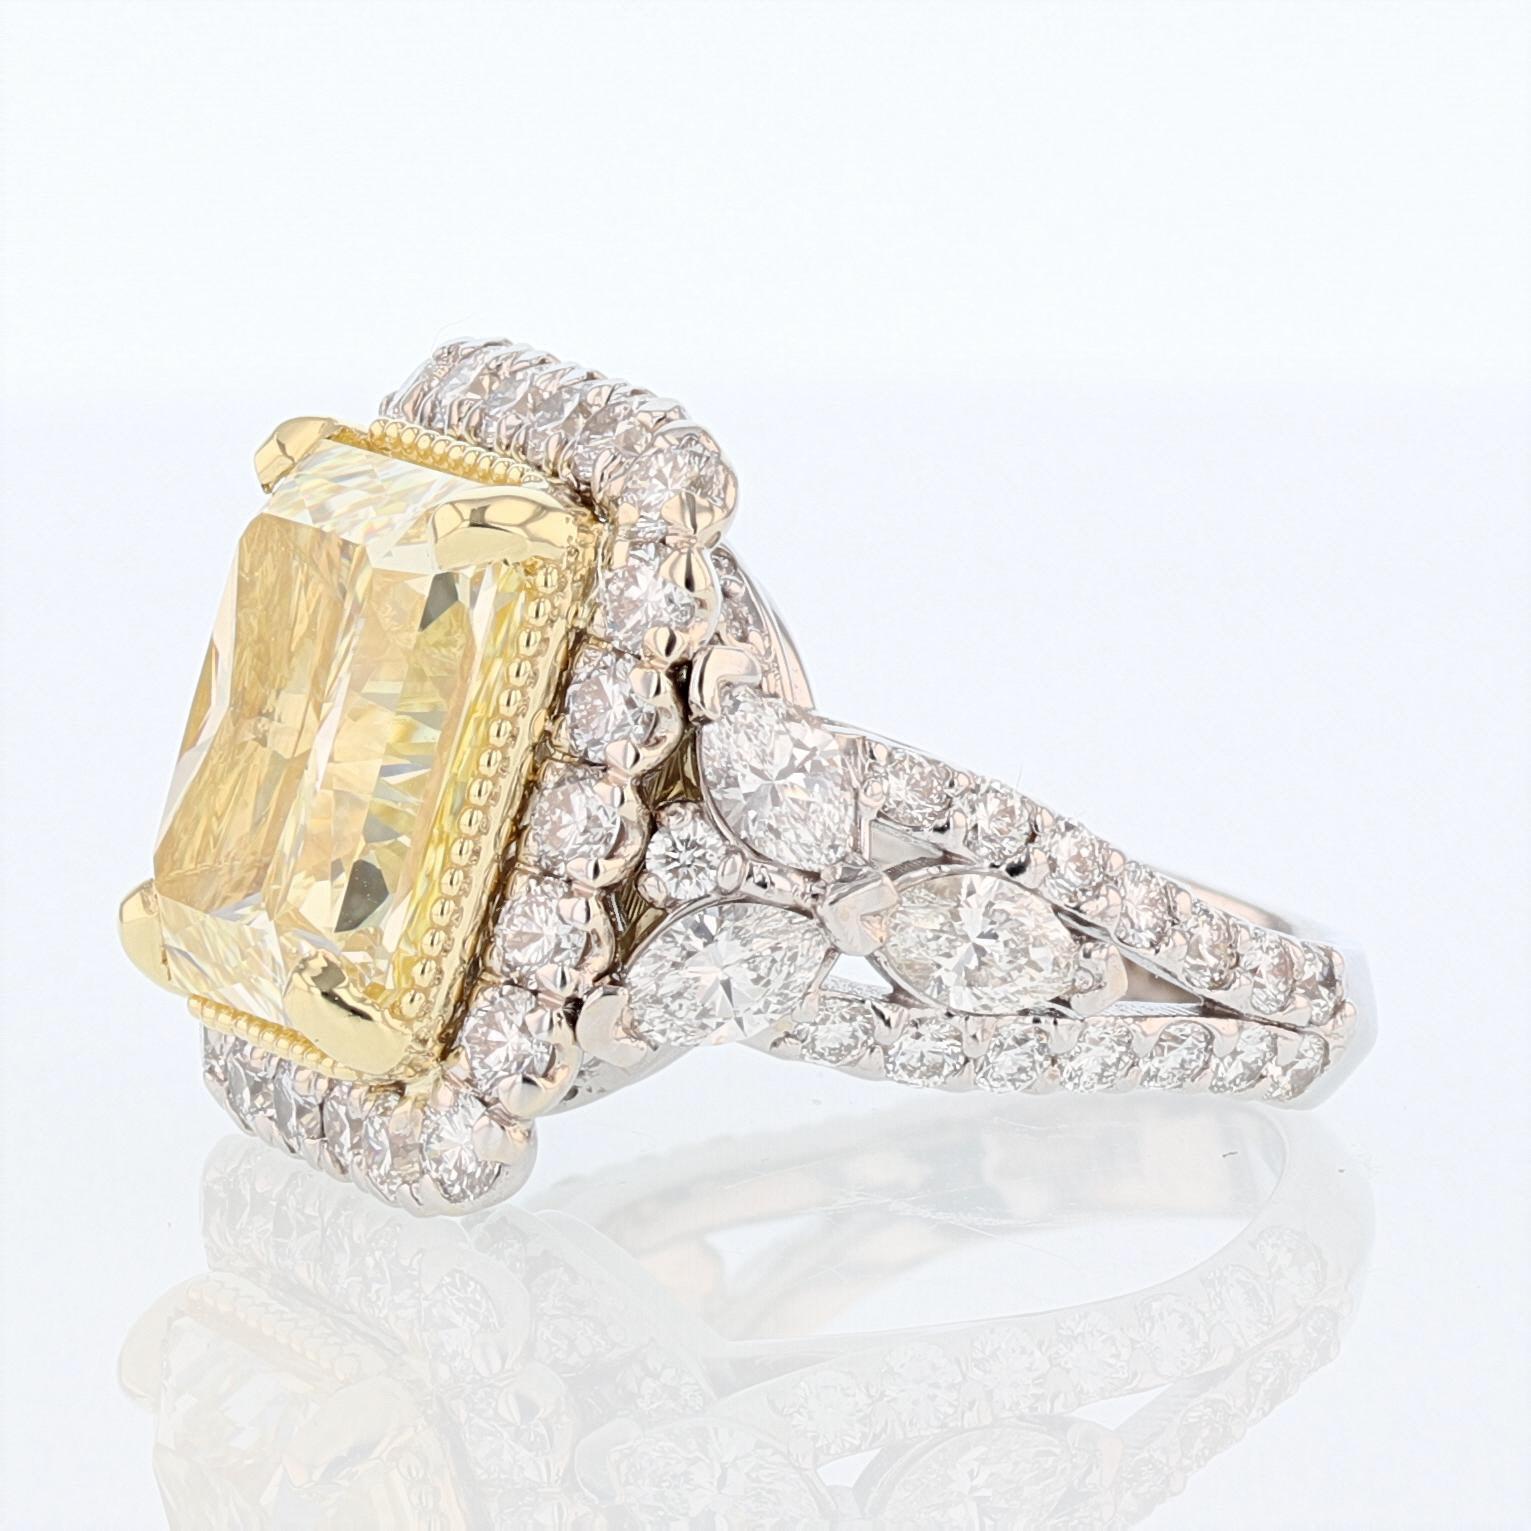 Nazarelle 18K W/Y Gold GIA 10.42ct Fancy Light Yellow Radiant Cut Diamond Ring In New Condition For Sale In Houston, TX